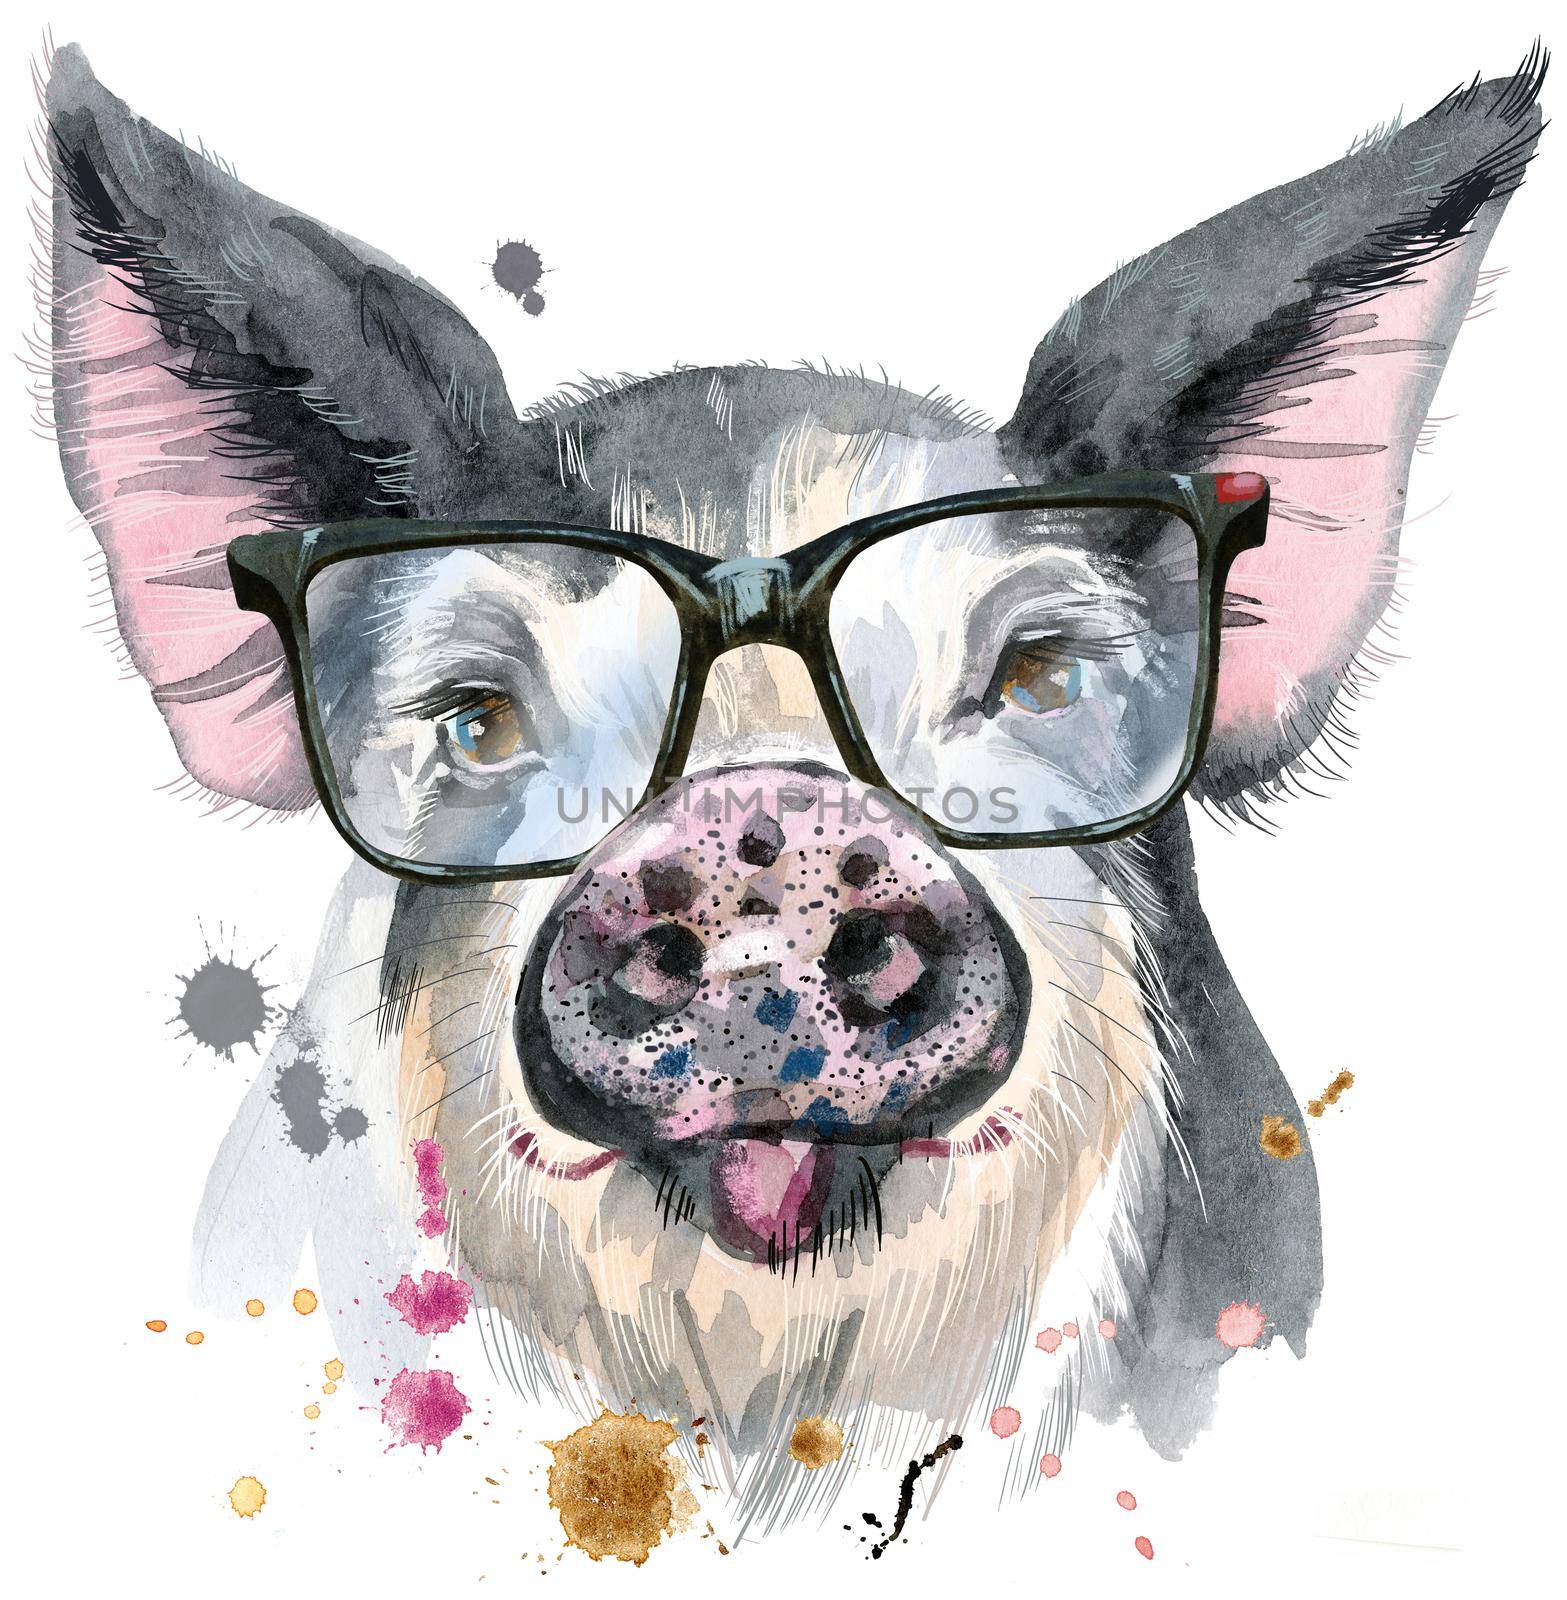 Cute piggy. Pig with glasses for T-shirt graphics. Watercolor pig in black spots illustration